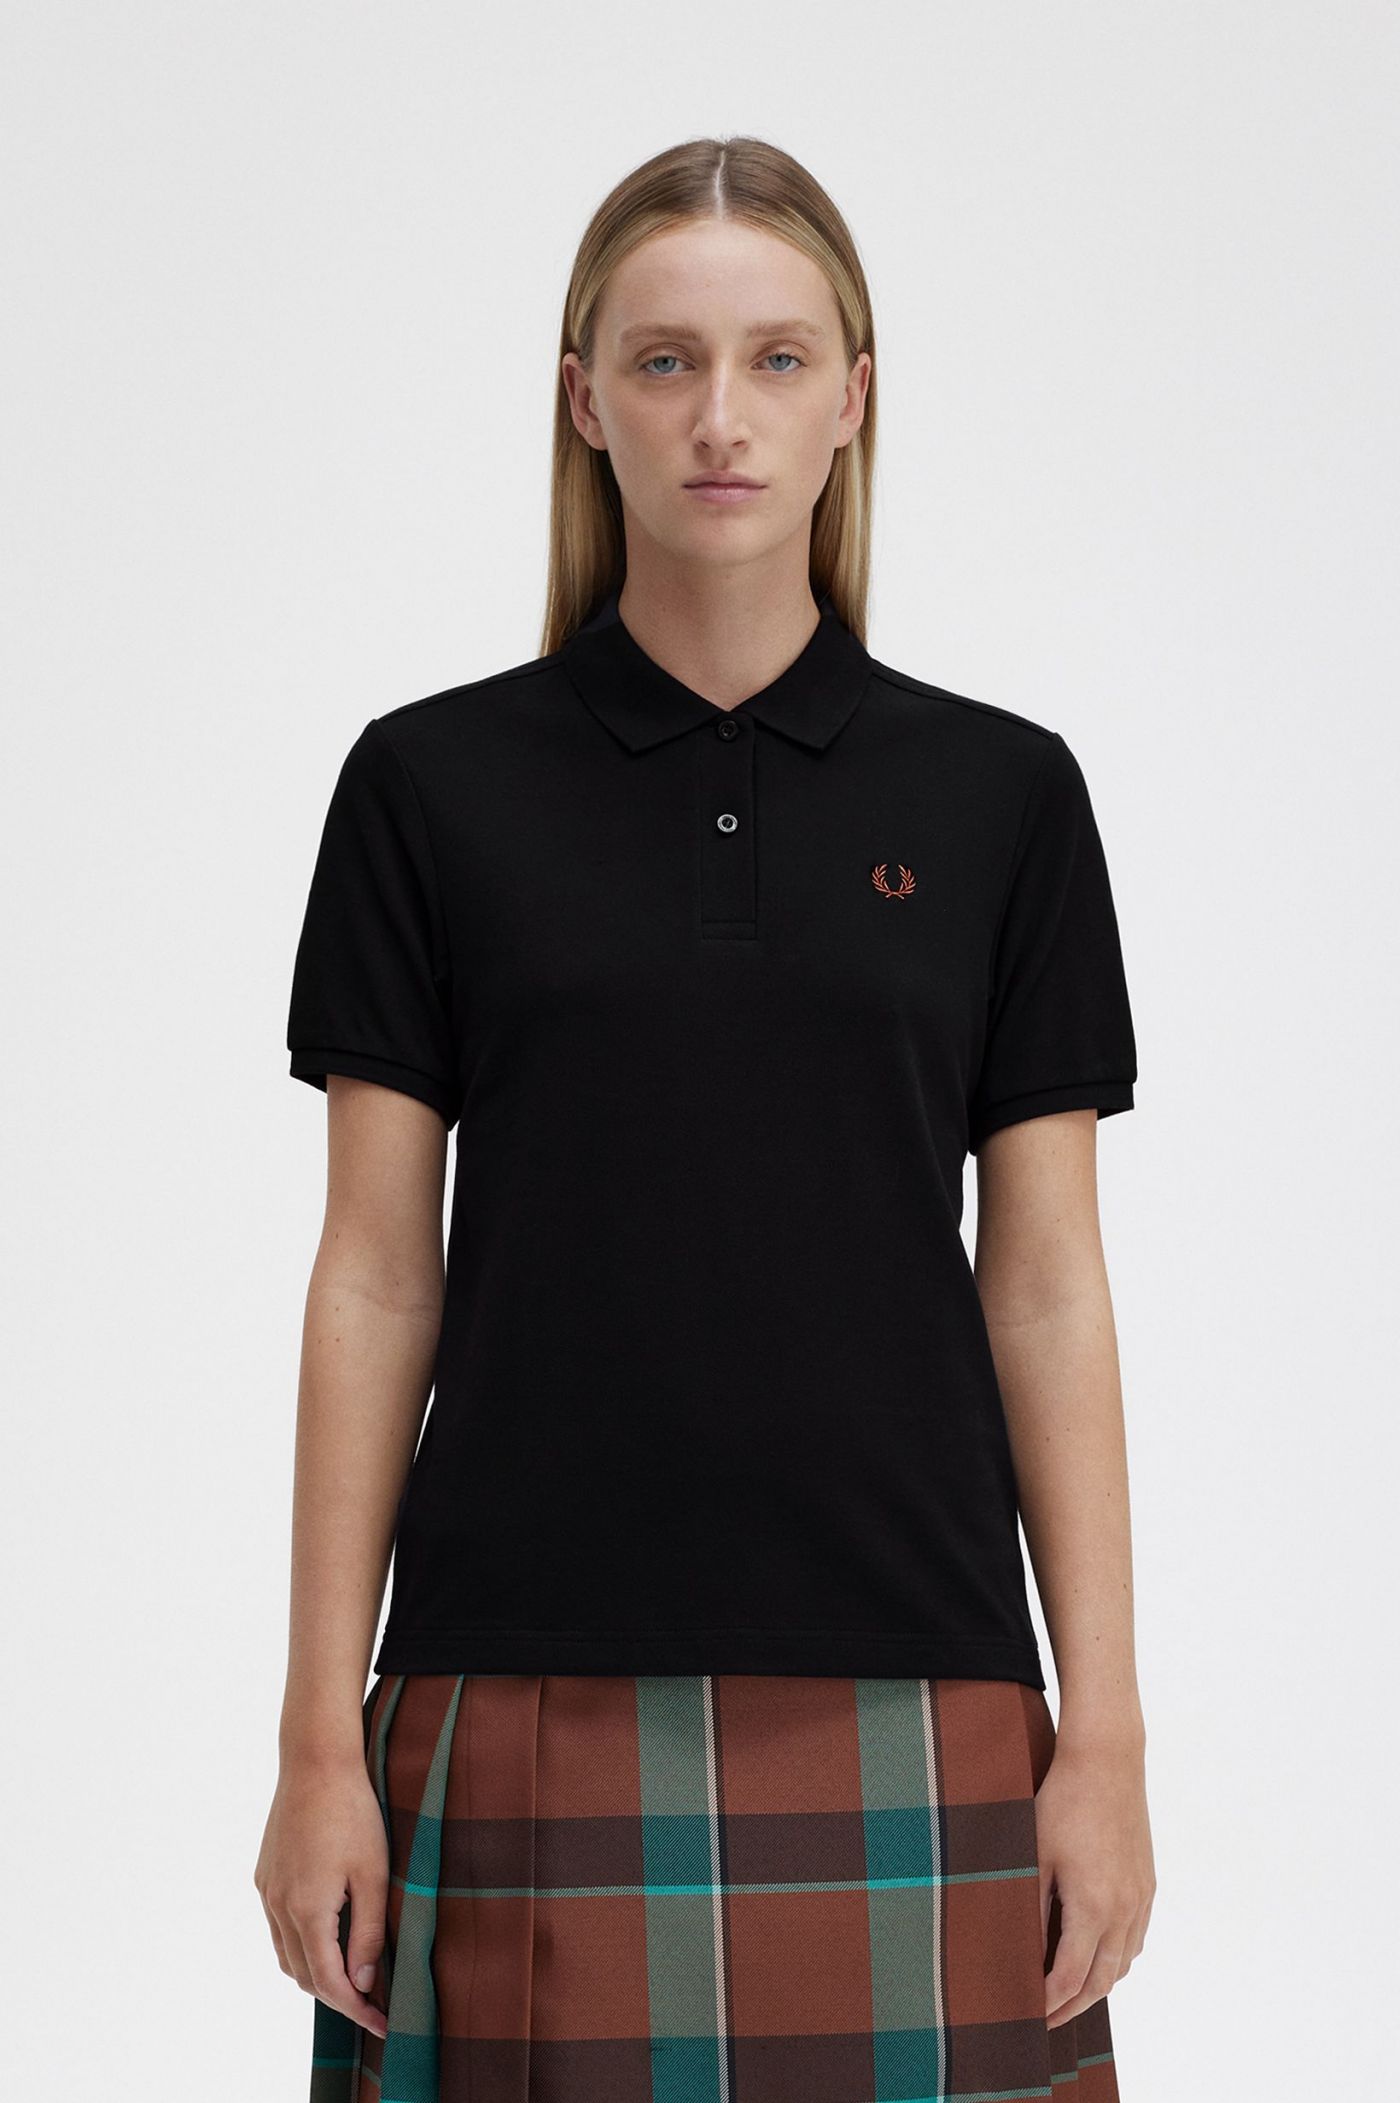 G6000 - Black / Whisky Brown | The Fred Perry Shirt | Women's 